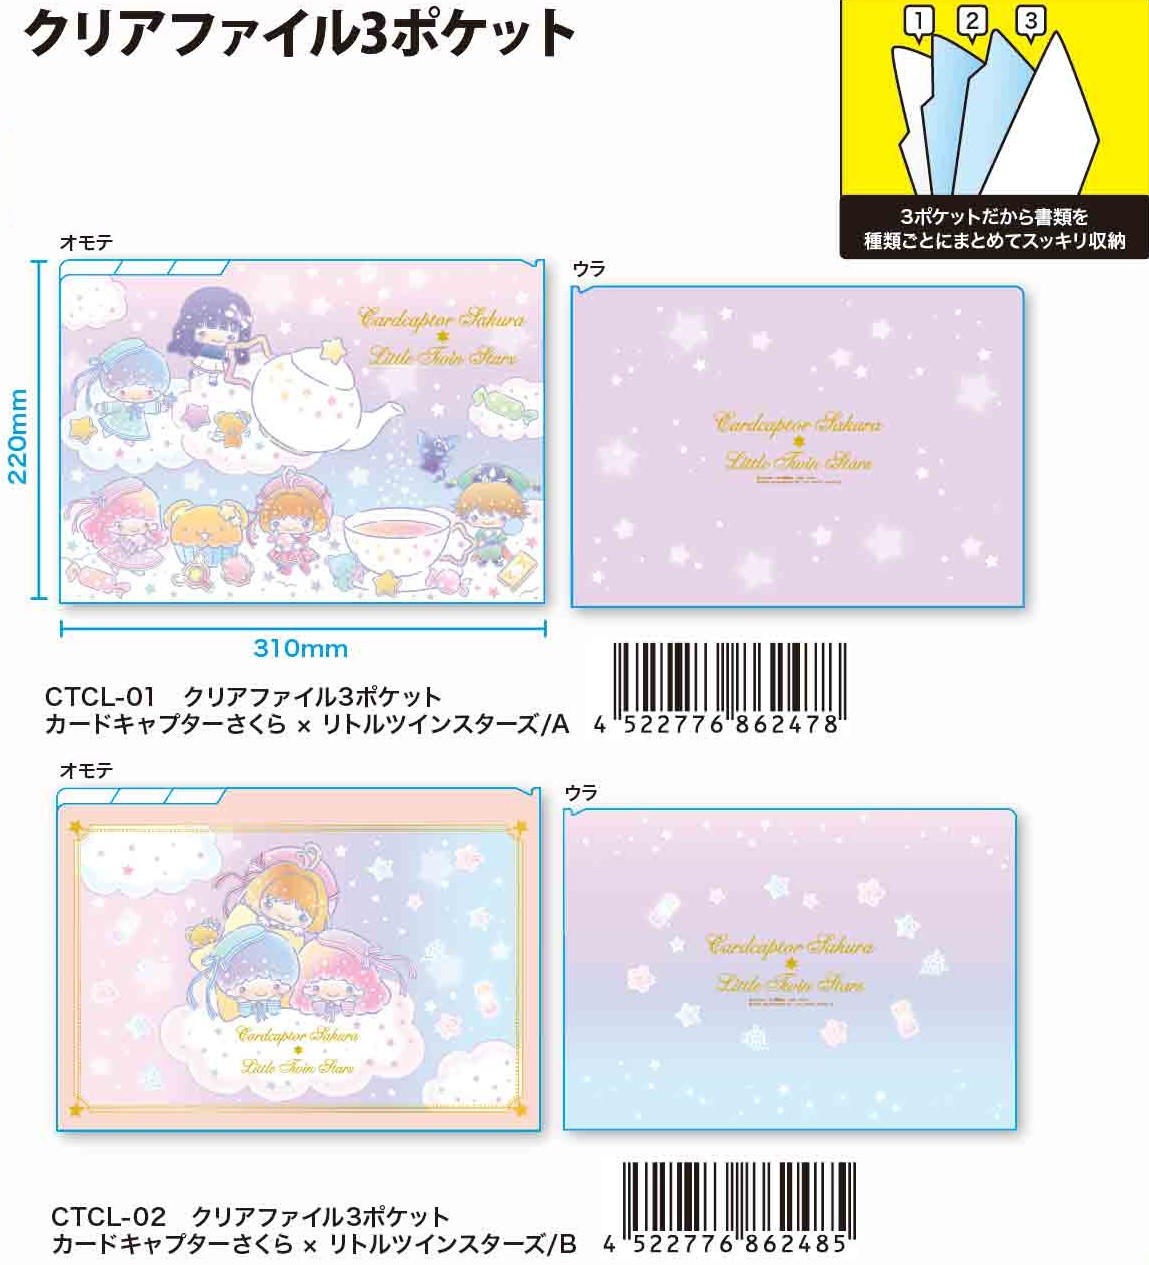 Plastic Folder Pocket Card Sakura Little Twin Star Import Japanese Products At Wholesale Prices Super Delivery